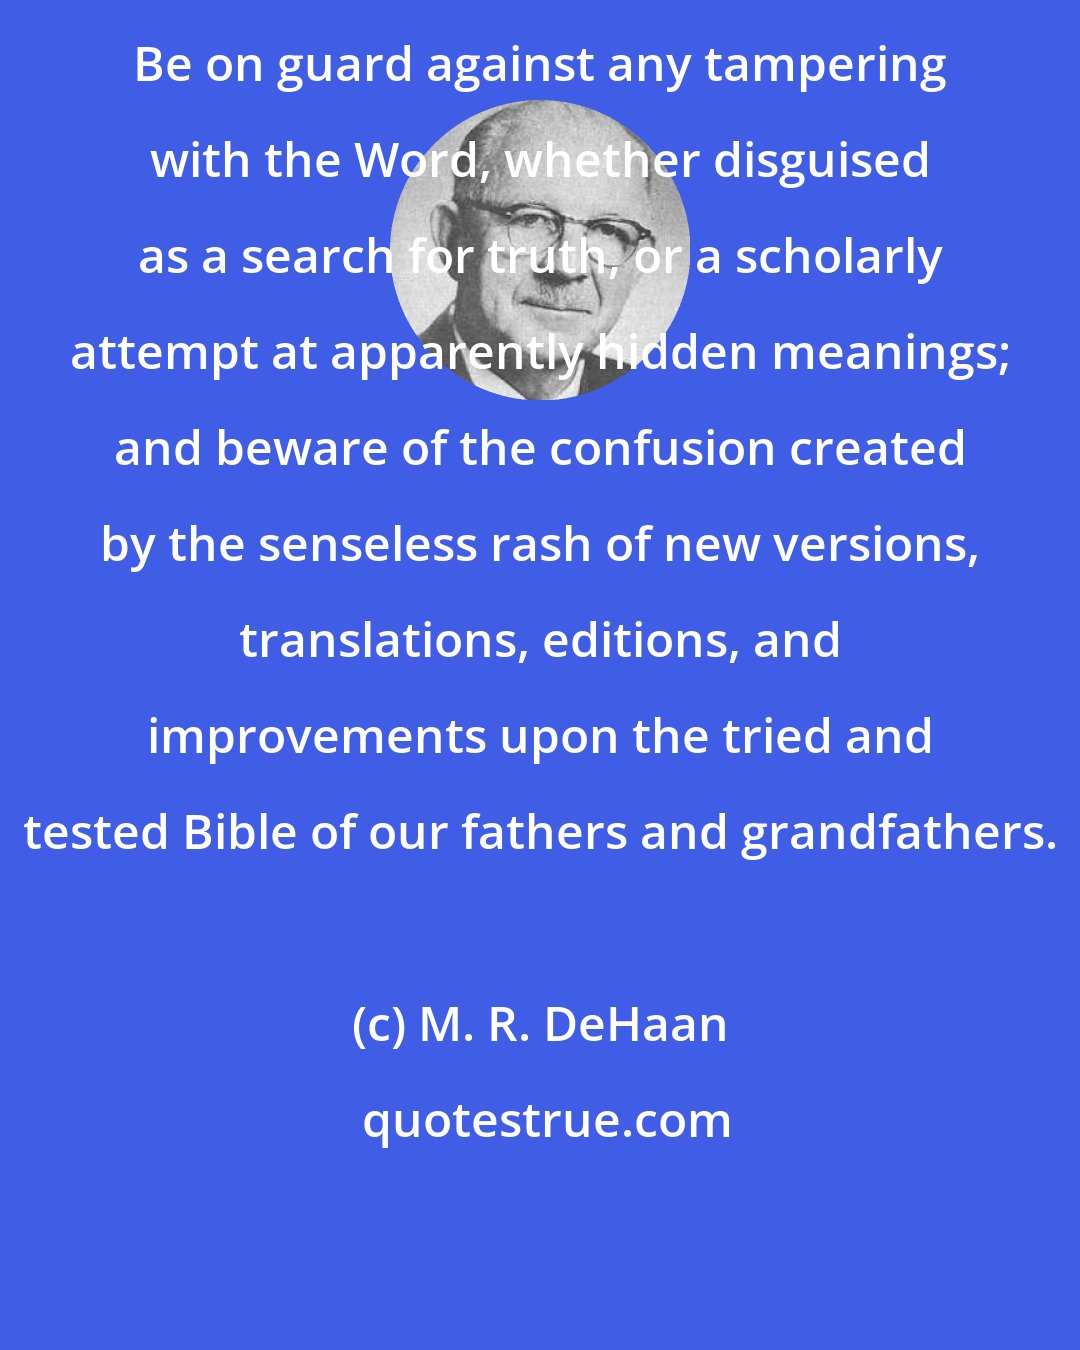 M. R. DeHaan: Be on guard against any tampering with the Word, whether disguised as a search for truth, or a scholarly attempt at apparently hidden meanings; and beware of the confusion created by the senseless rash of new versions, translations, editions, and improvements upon the tried and tested Bible of our fathers and grandfathers.